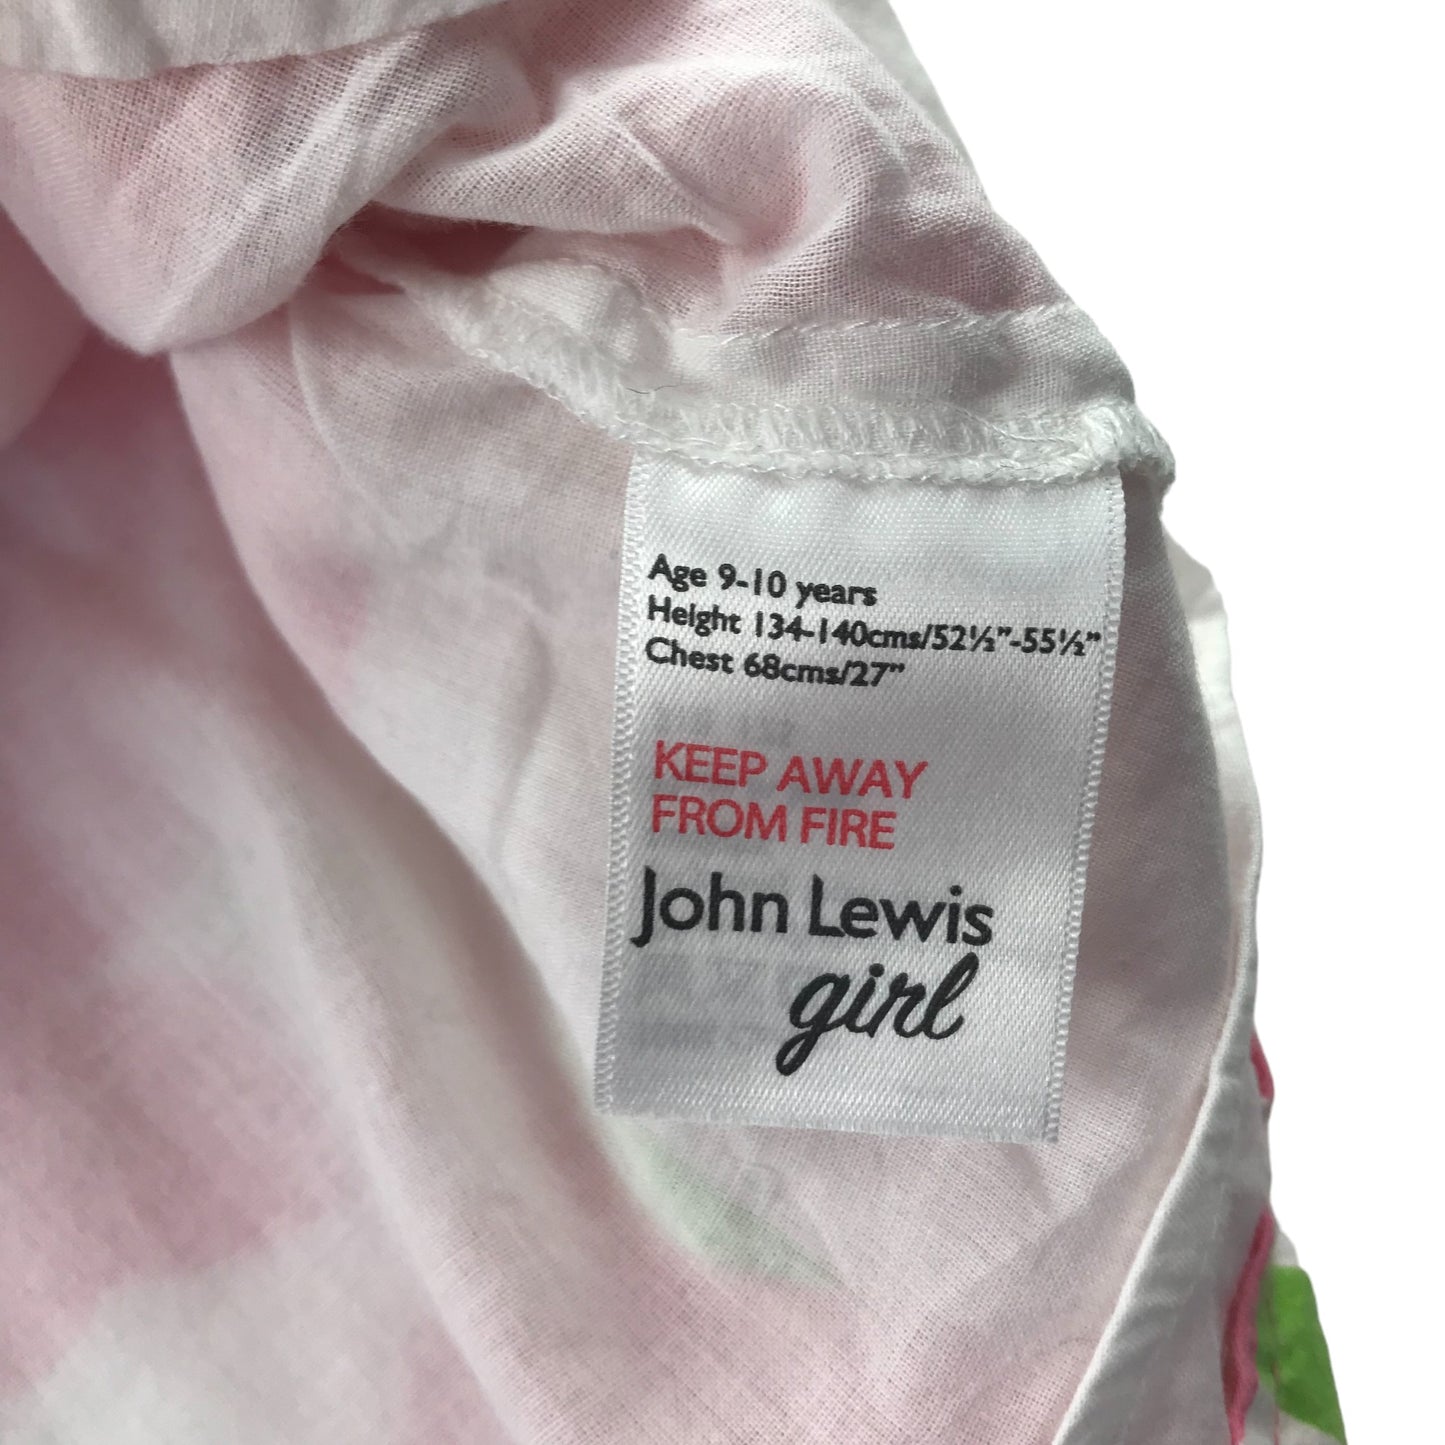 John Lewis Dress 9-10 years White and Pink Floral Cotton